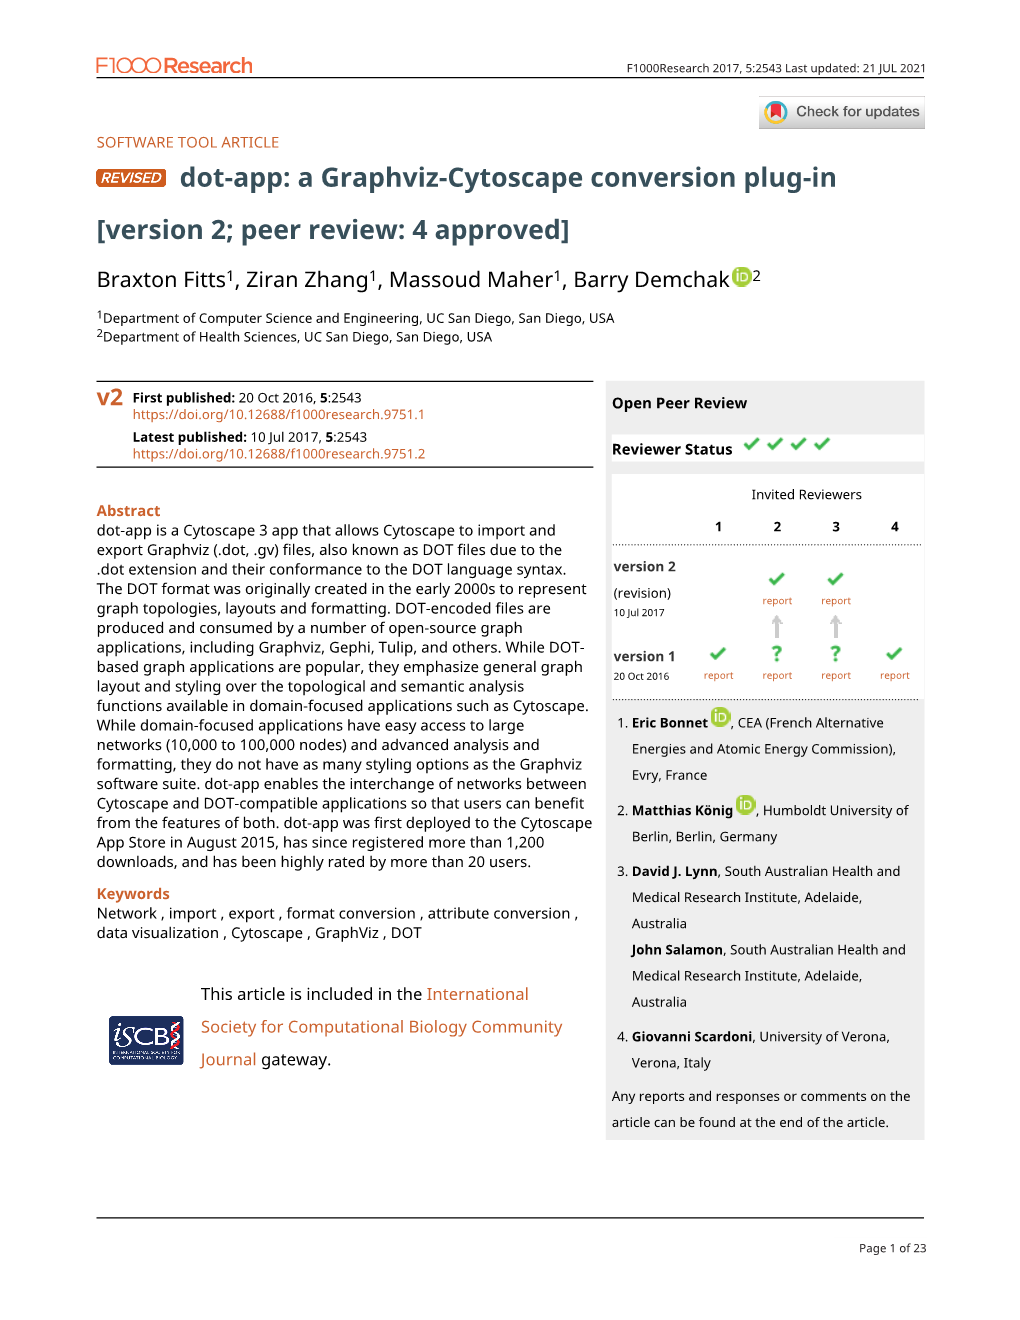 Dot-App: a Graphviz-Cytoscape Conversion Plug-In [Version 2; Peer Review: 4 Approved]